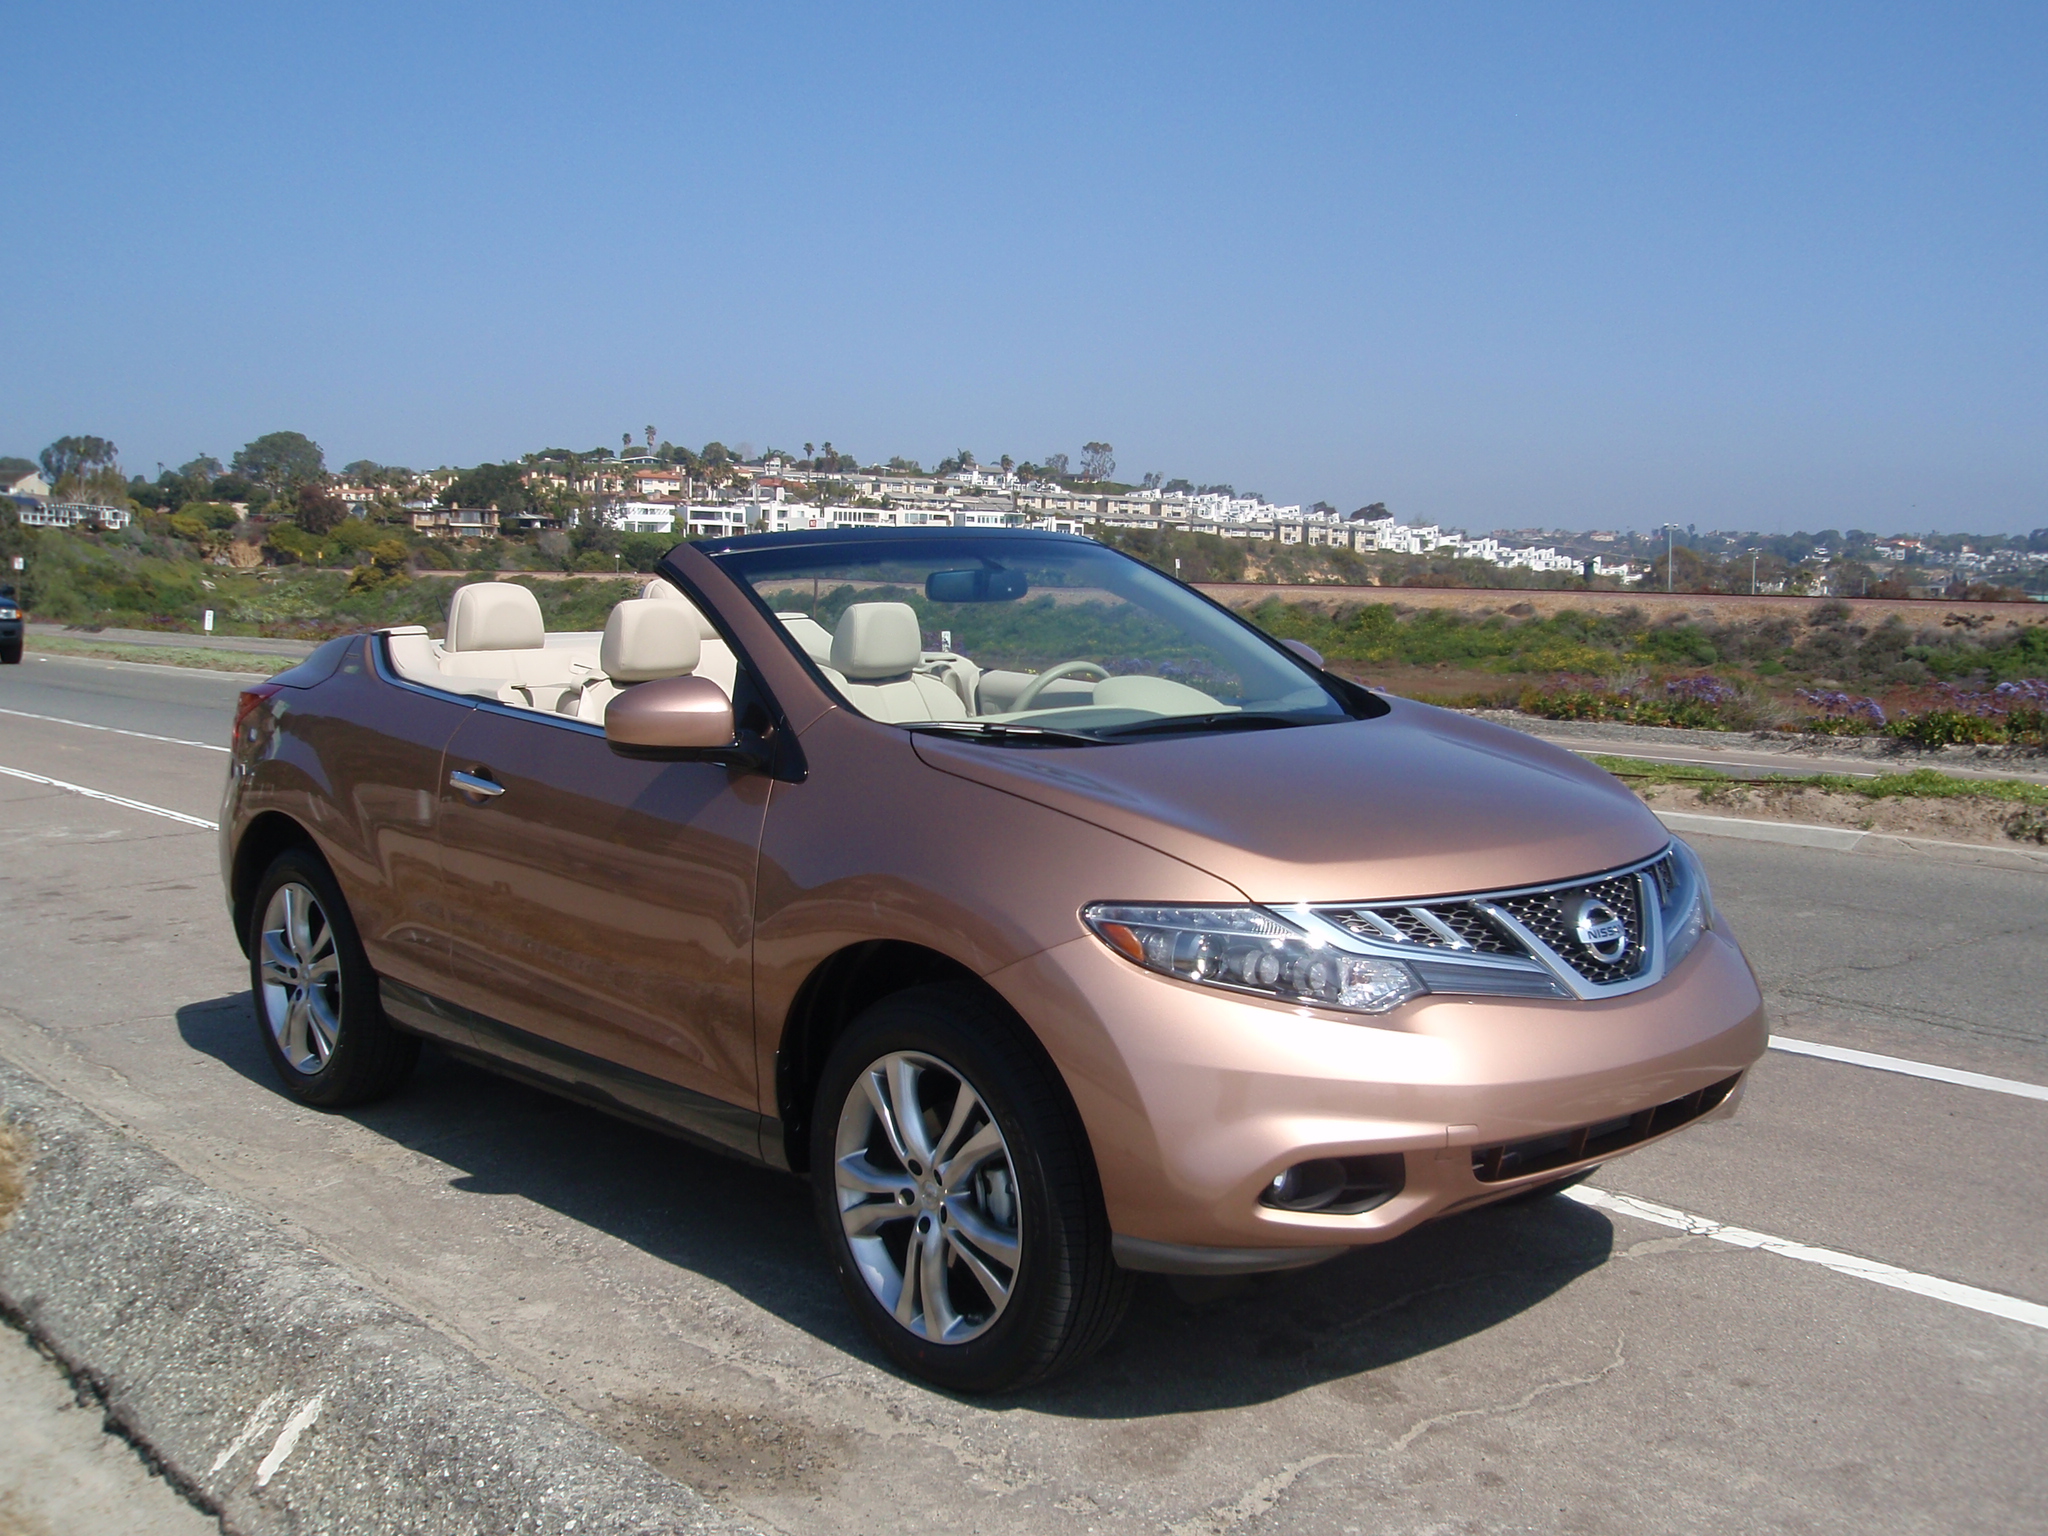 First Drive: Nissan Murano CrossCabriolet | Our Auto Expert